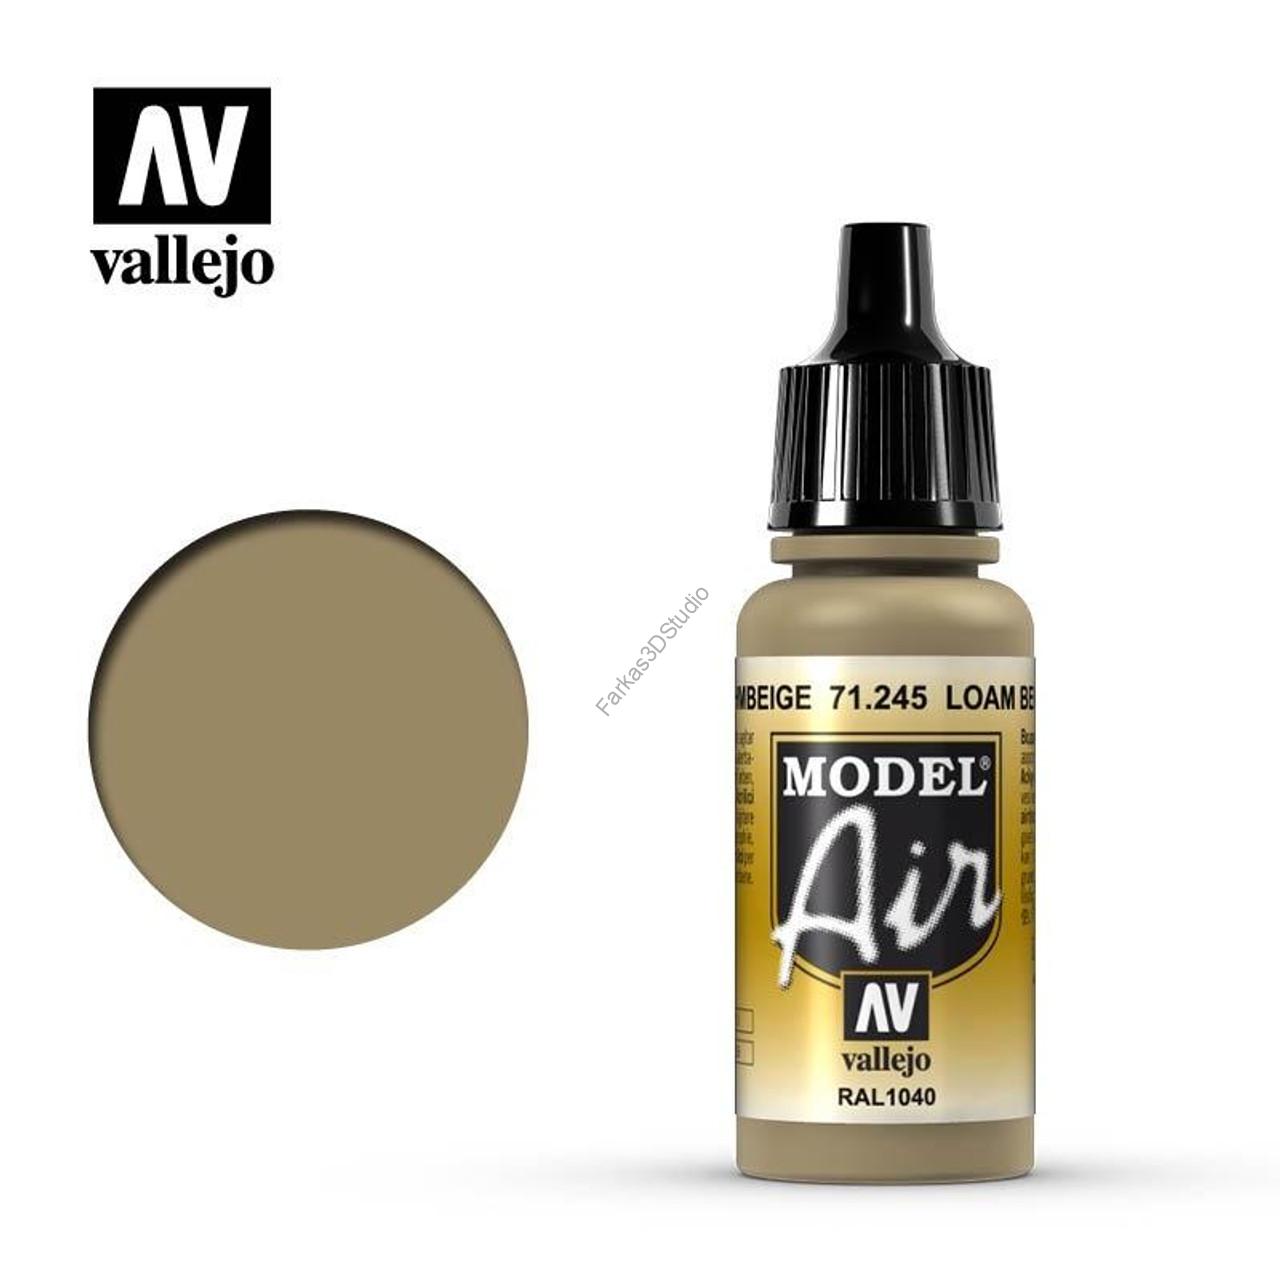 Vallejo - Model Air - Loambrown RAL 1040 17 ml